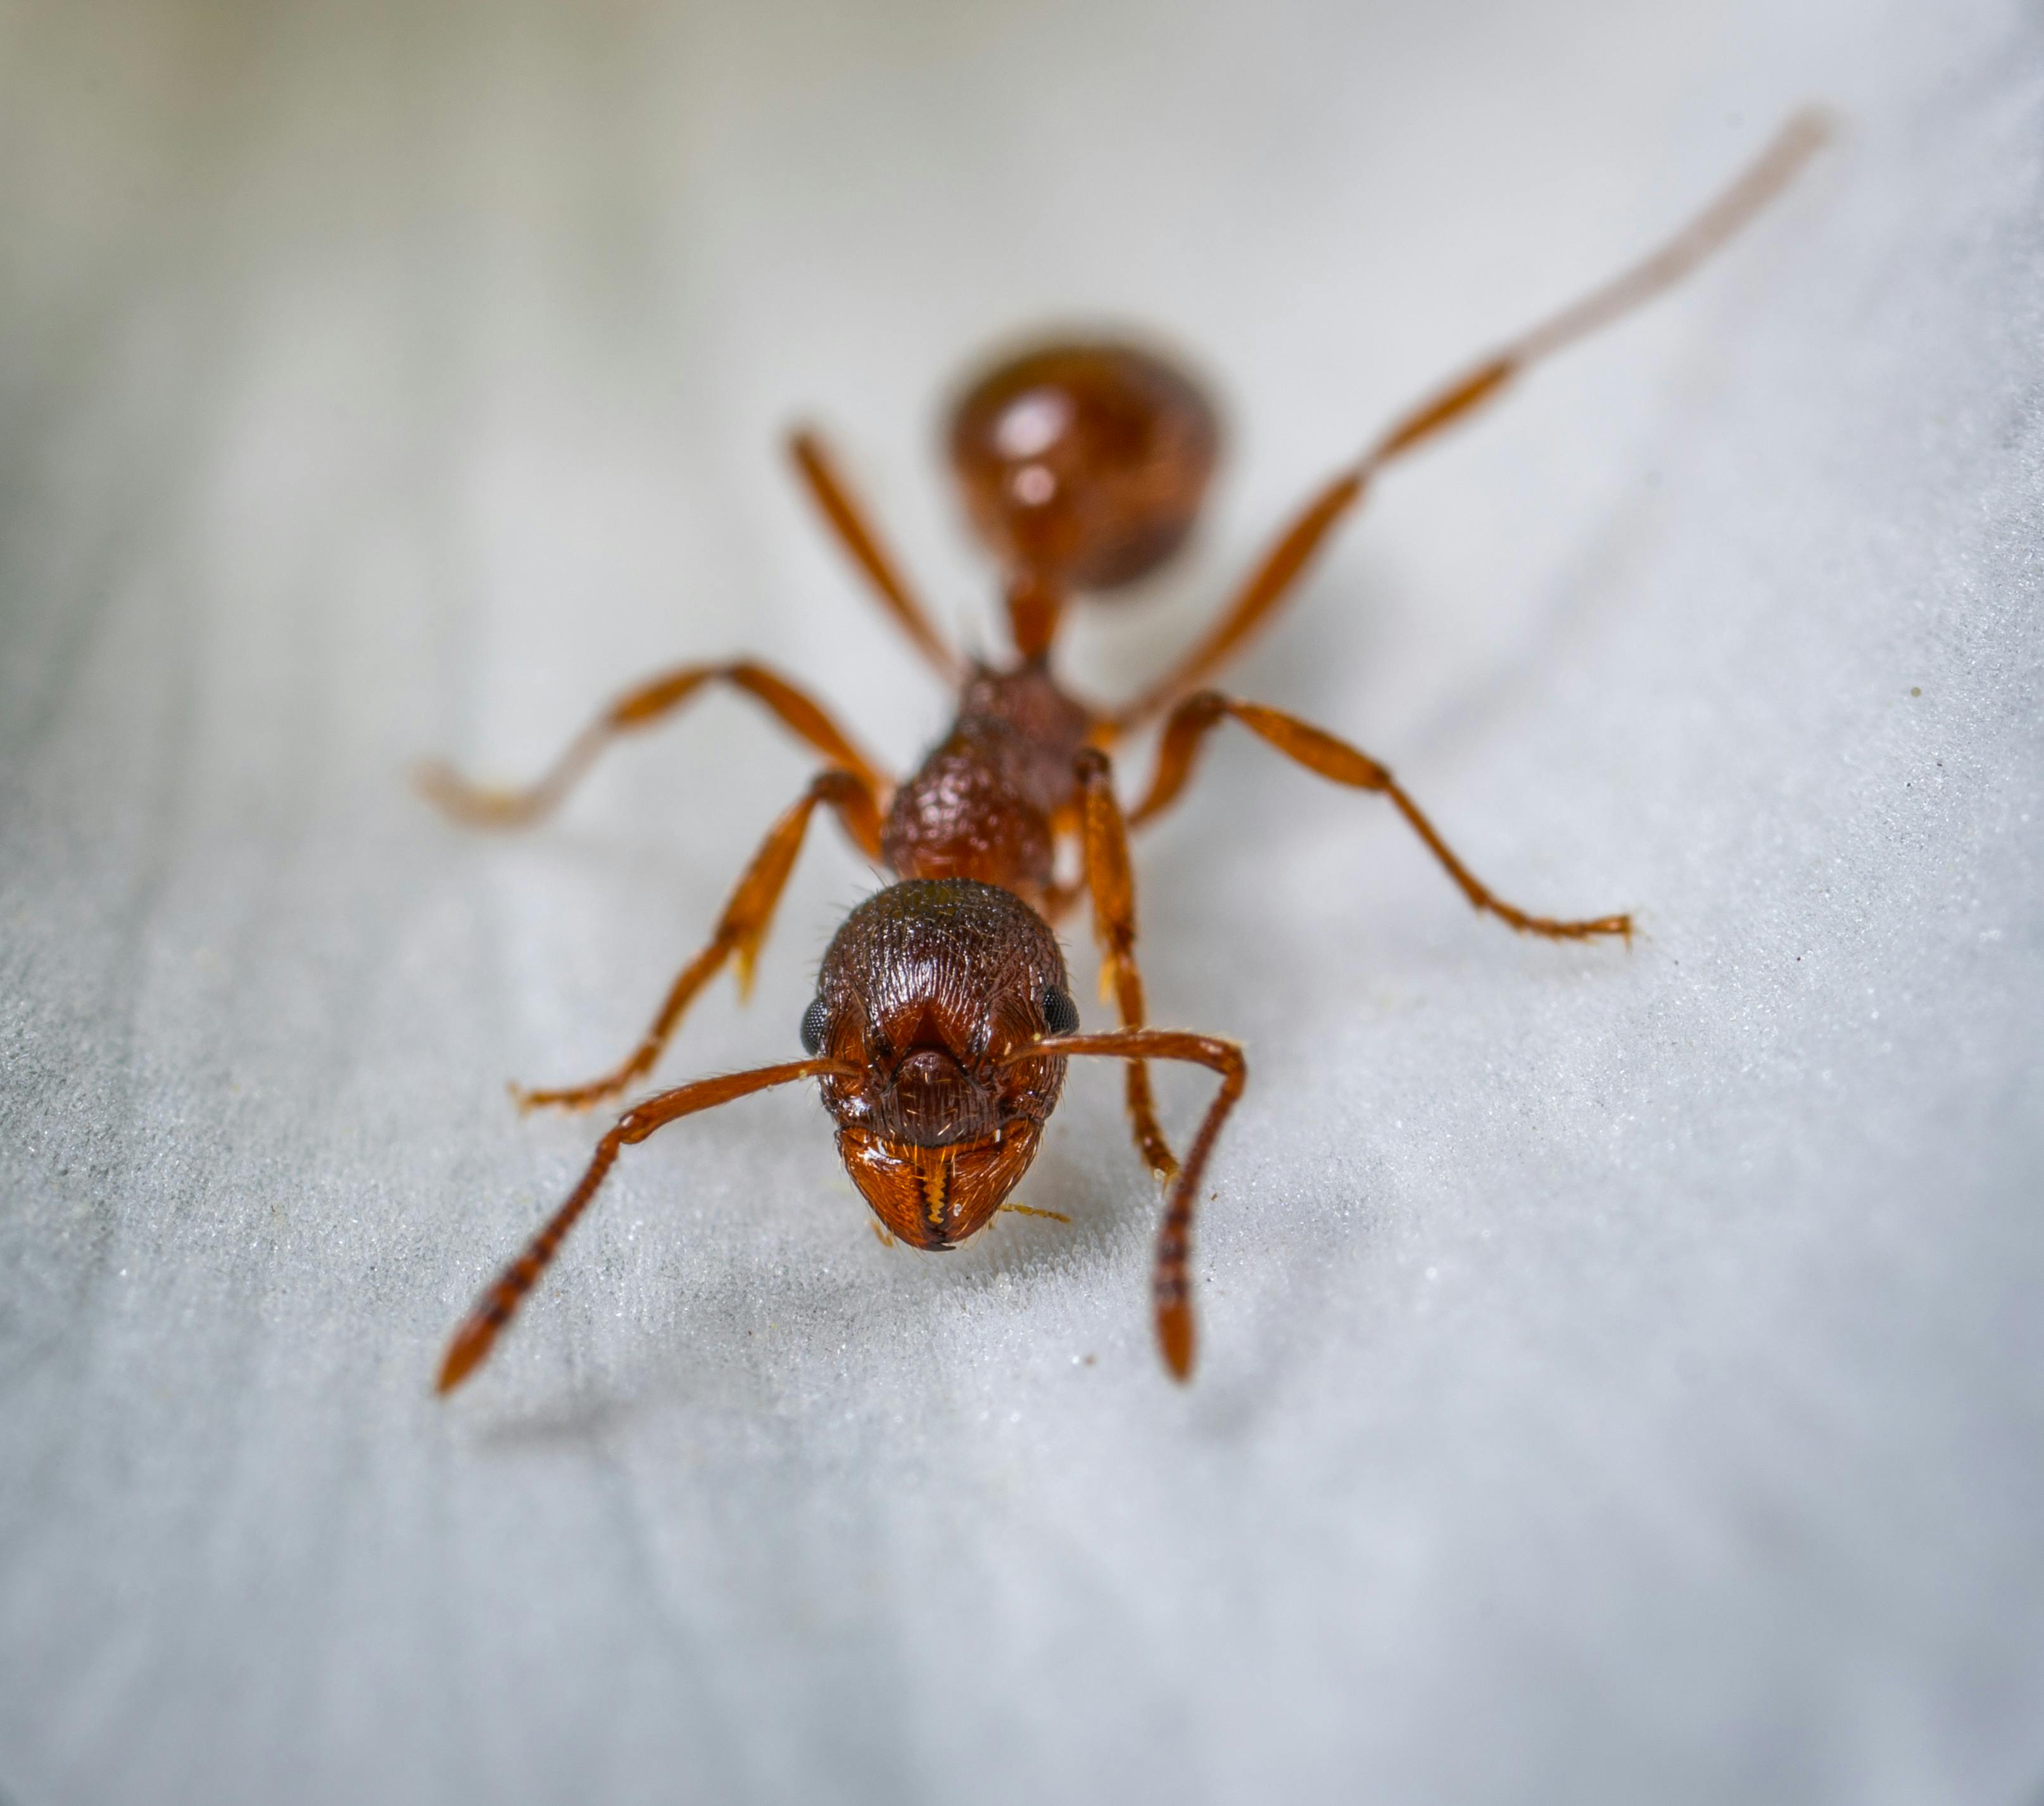 Large Ant - Stock Image - C002/2184 - Science Photo Library